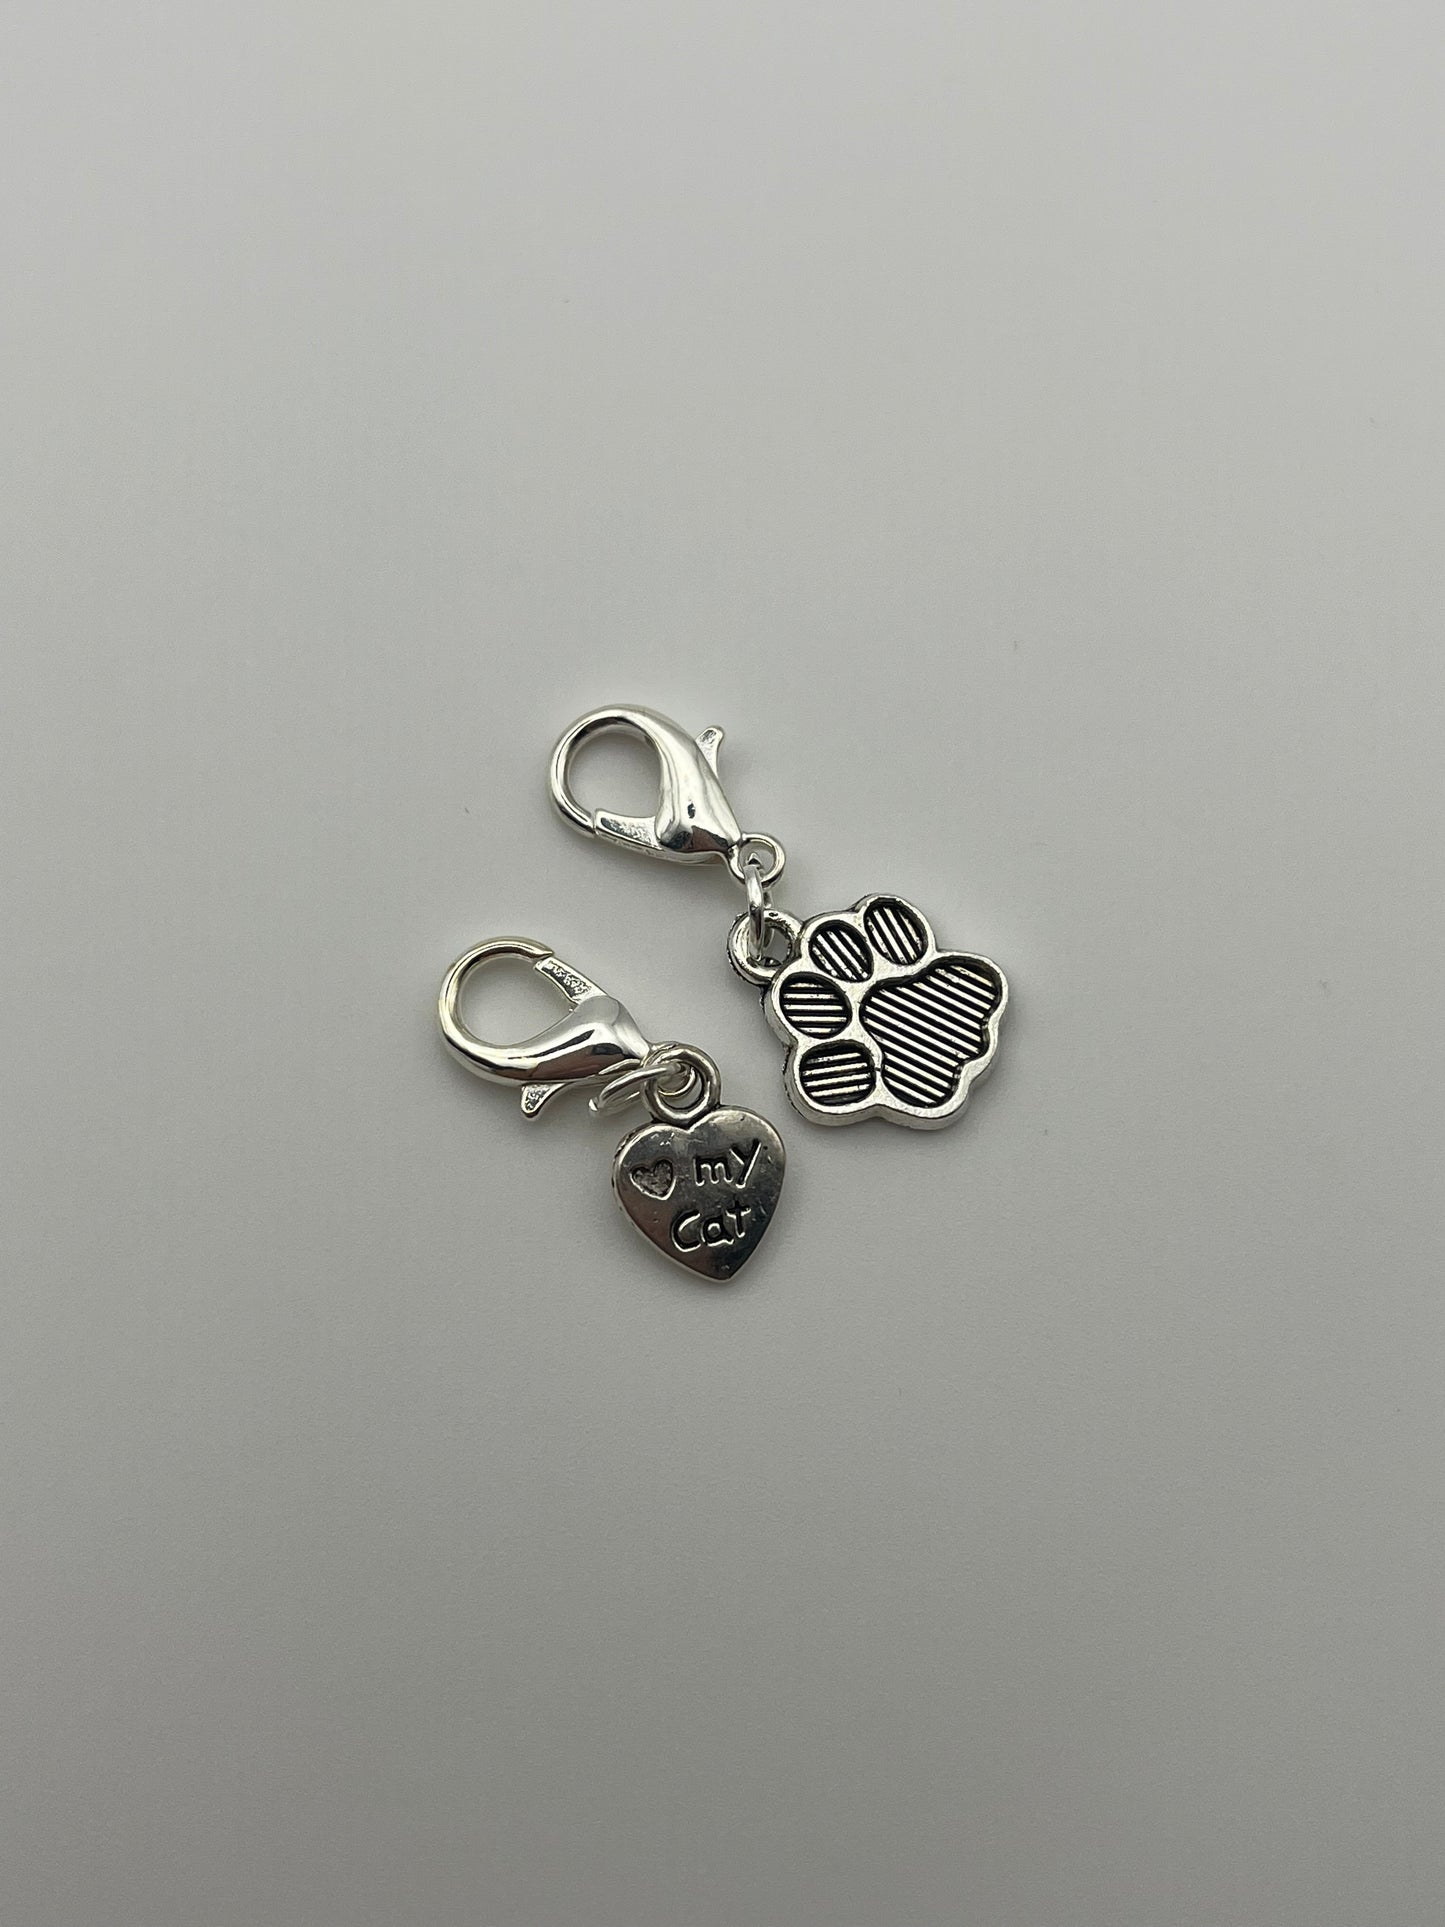 CAT PERSON - “The best cuddles come with a few scratches” - White Satin Reusable Adhesive Bookmark with Two Charms (Paw and Heart My Cat) in Gift Box